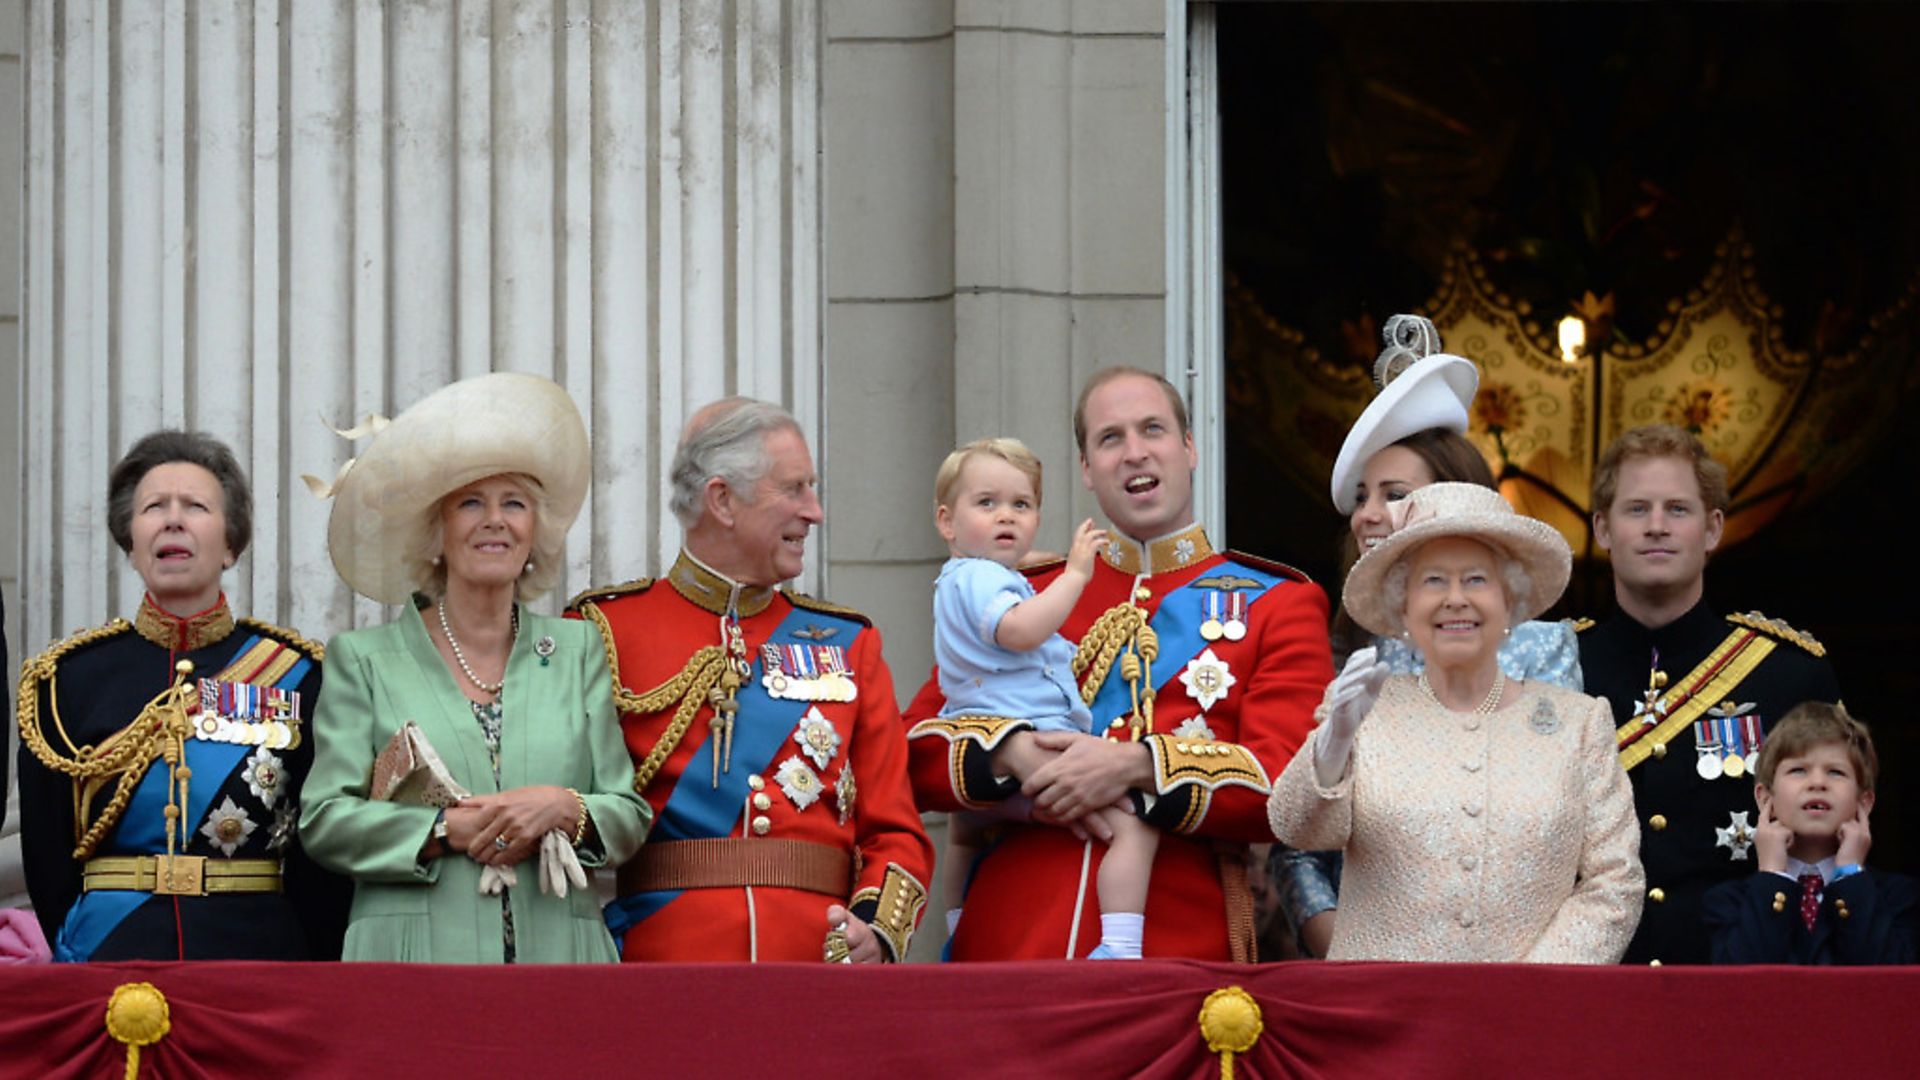 Princess Anne, the Princess Royal, Camilla, Duchess of Cornwall, Prince Charles, Prince of Wales, Prince George, Prince William, Duke of Cambridge, Catherine, Duchess of Cambridge, Queen Elizabeth ll, Prince Harry and James, Viscount Severn look out from the balcony of Buckingham Palace. Photo: WireImage.